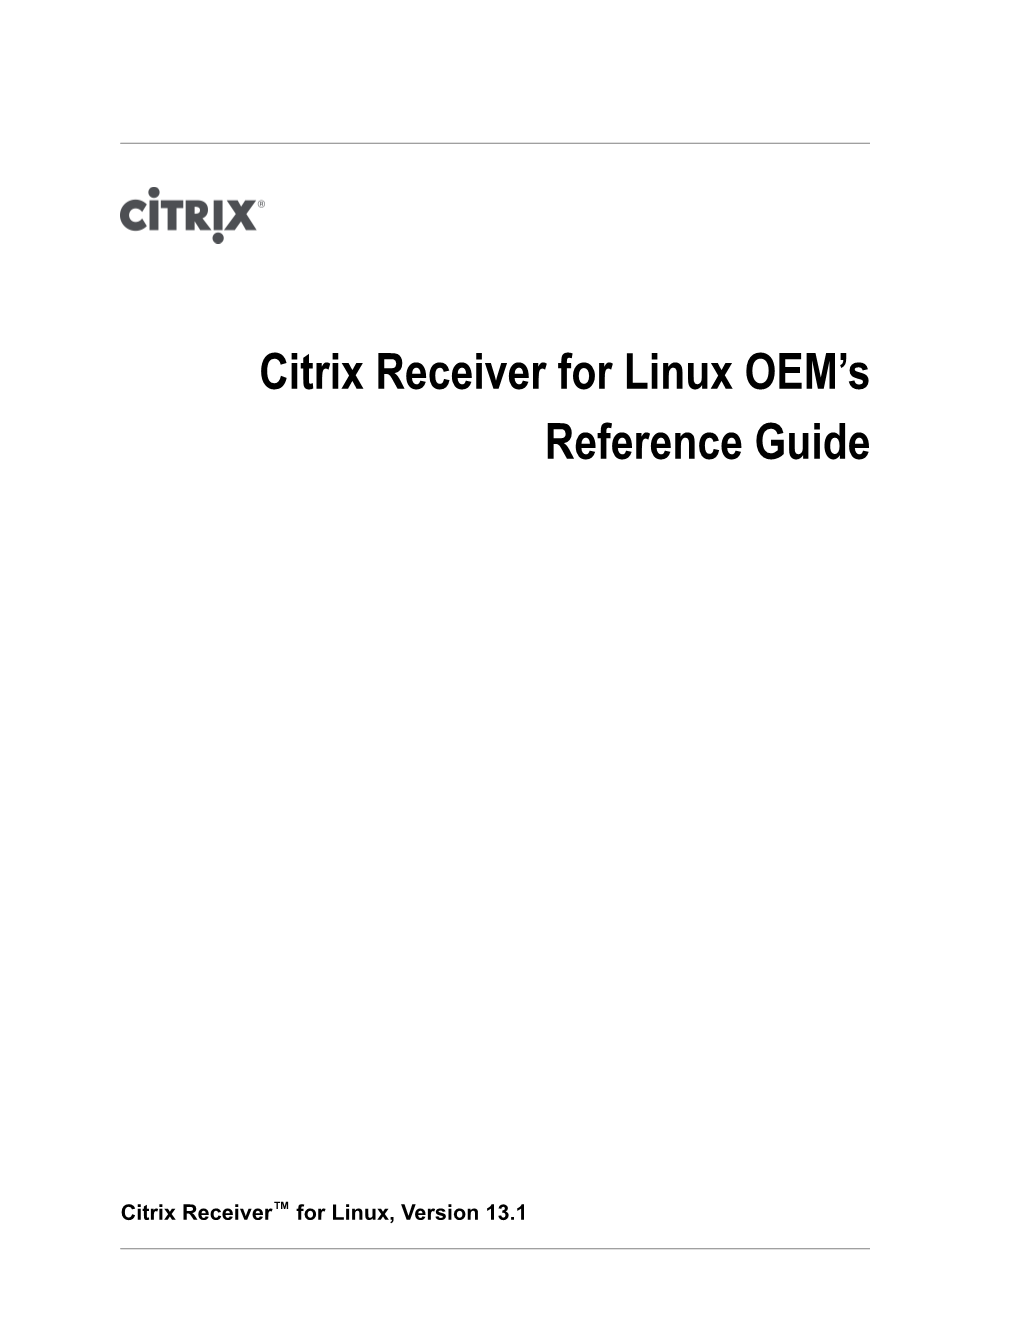 Citrix Receiver for Linux OEM's Reference Guide